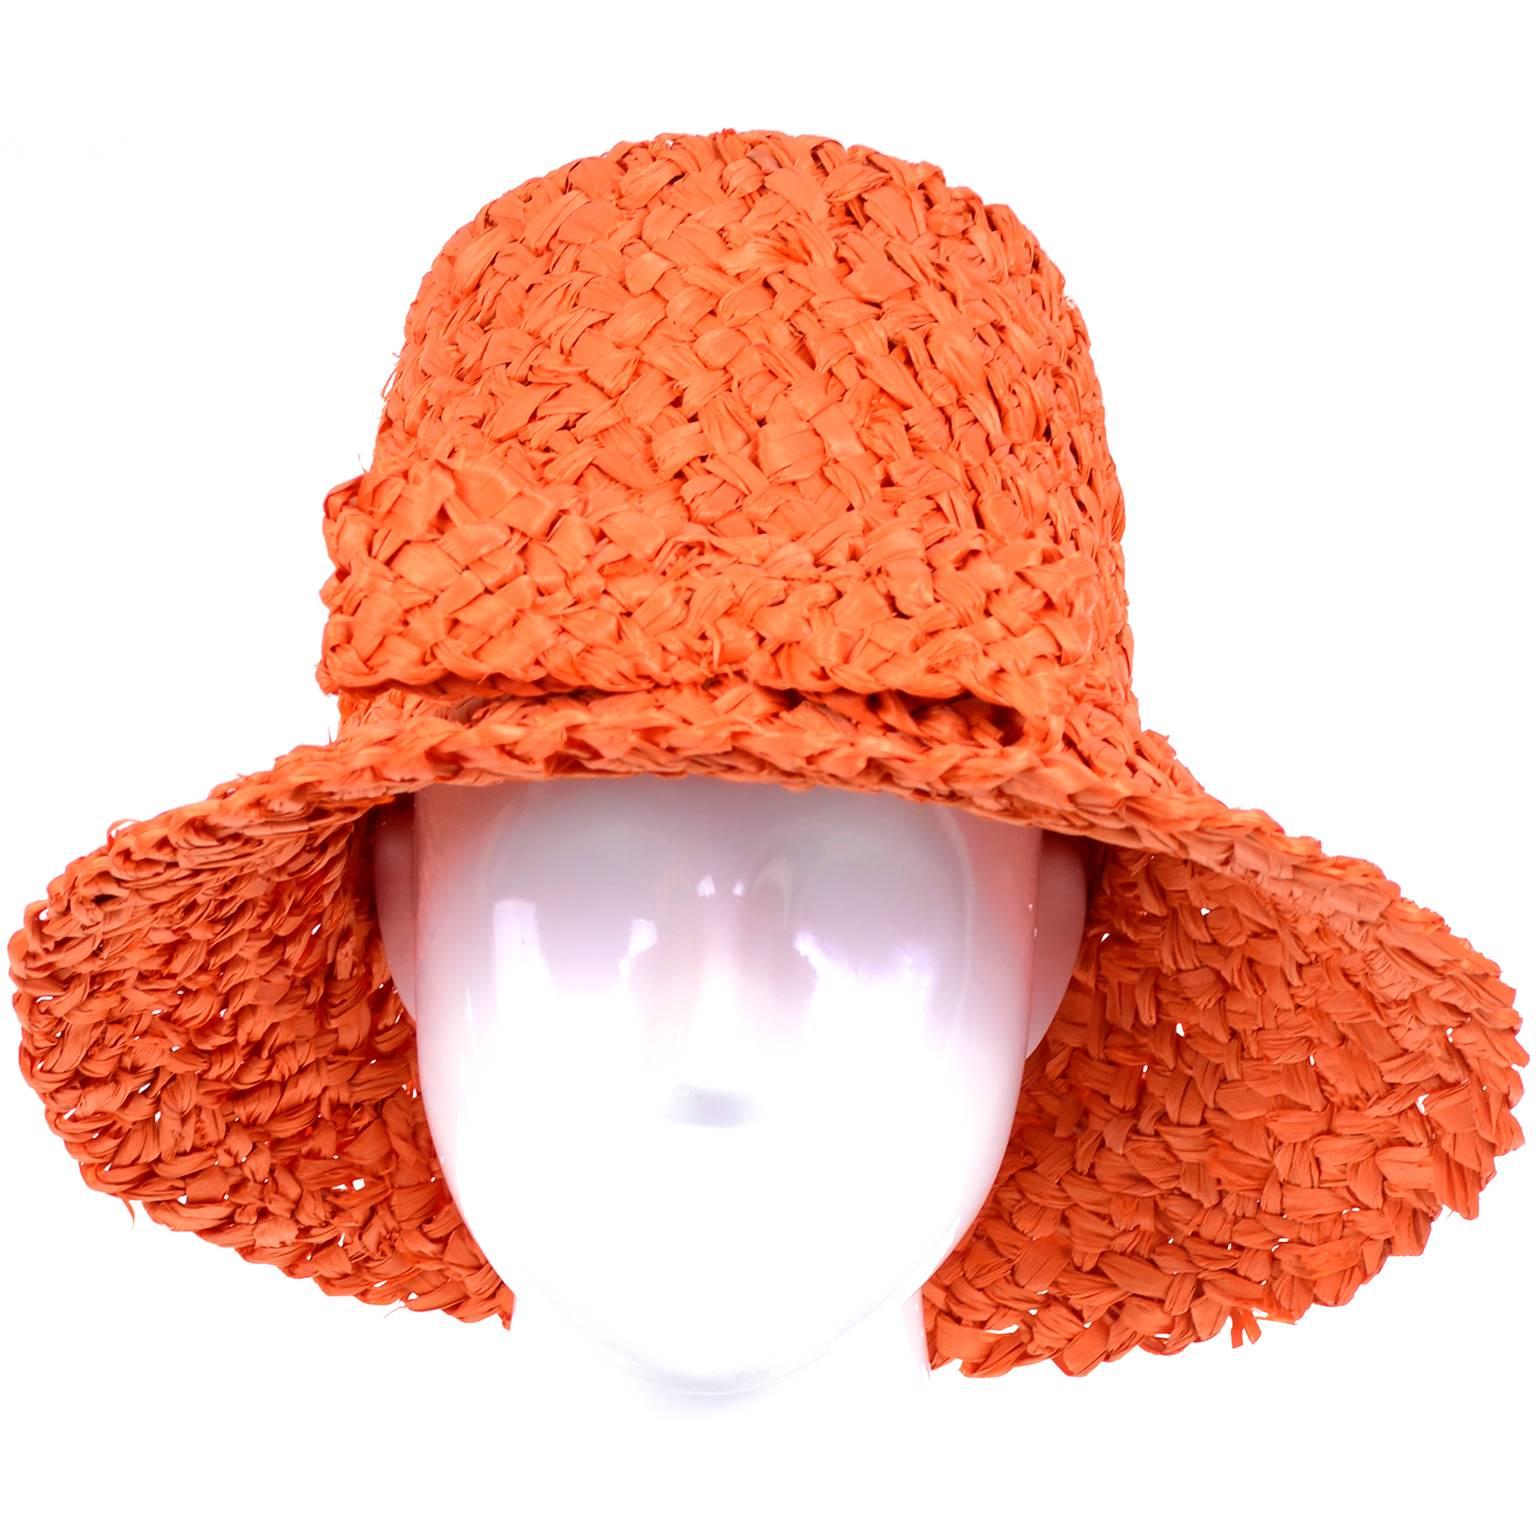 This hat is so reminiscent of images from Vogue in the 1960's with models sitting on the beach in swimsuits and wearing hats just like this one!  This is a tall vintage orange straw raffia hat that measures 6